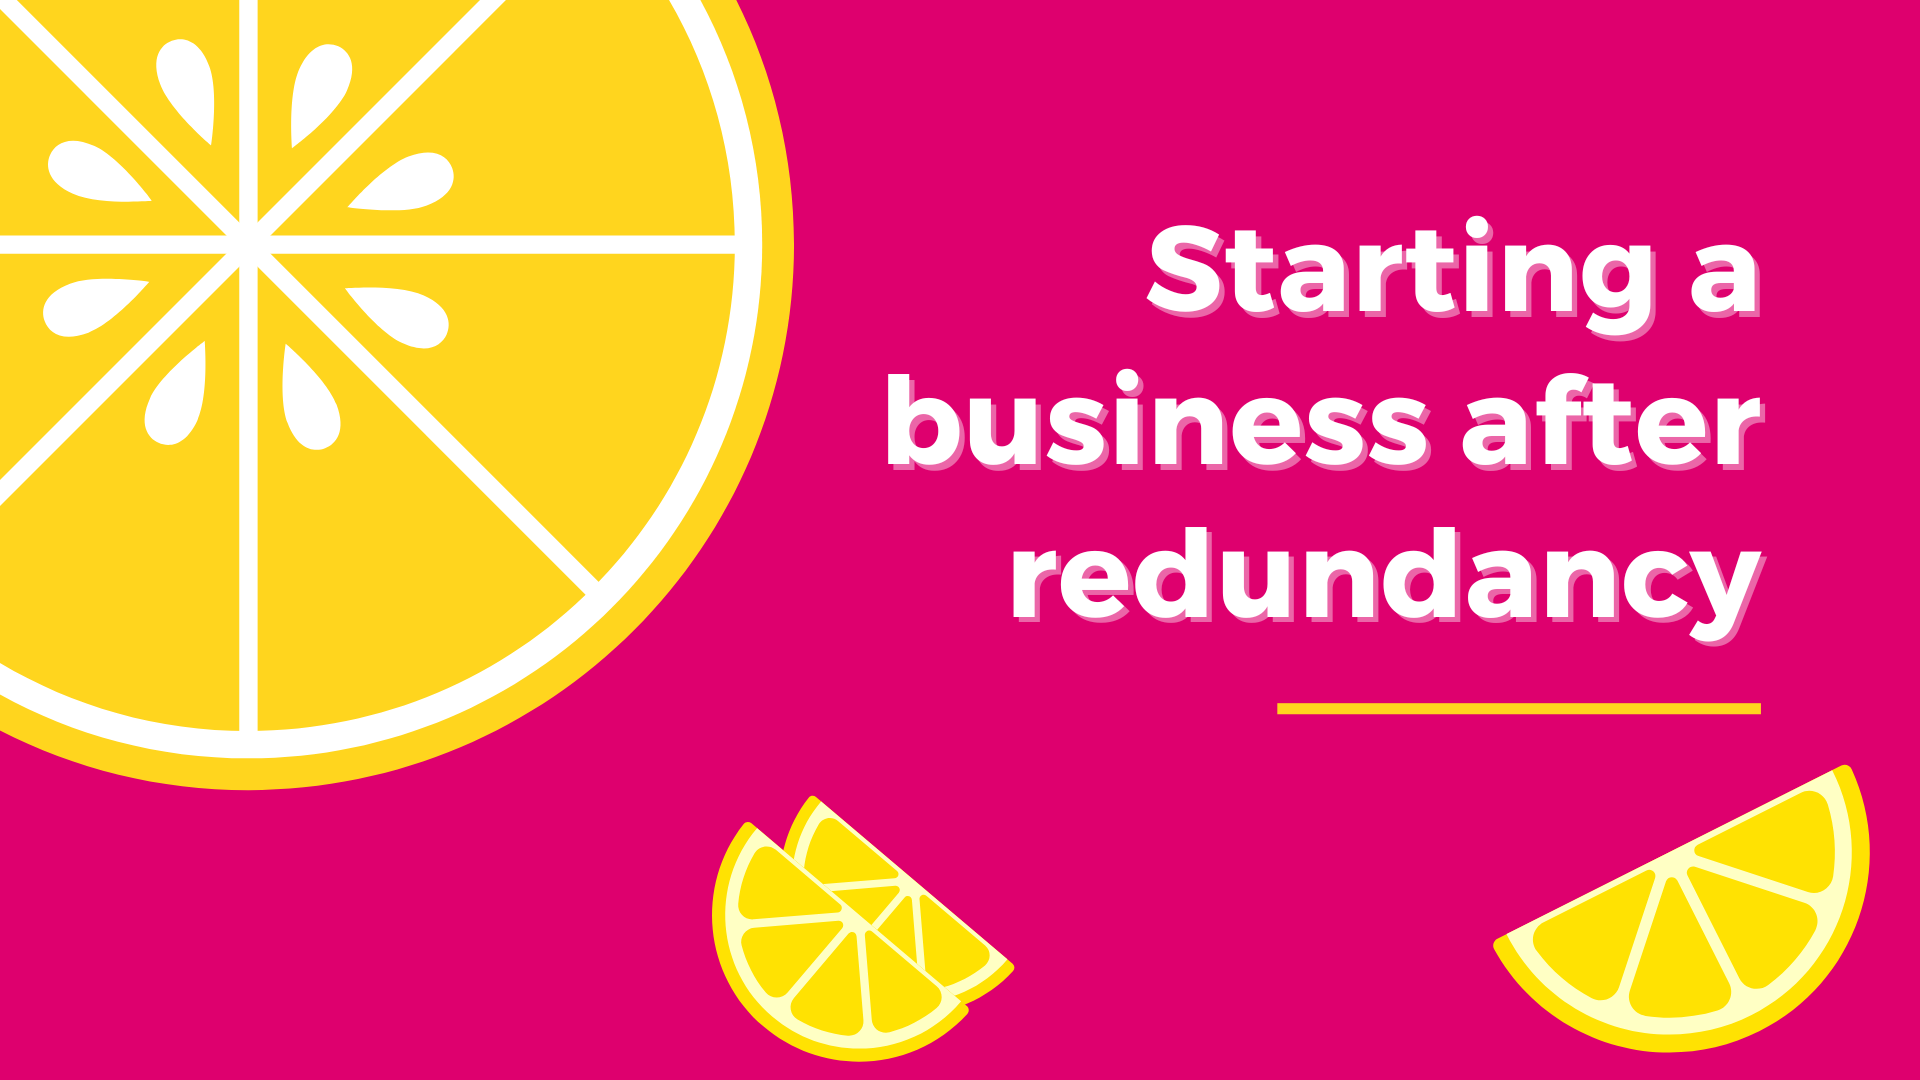 Starting your own business after redundancy